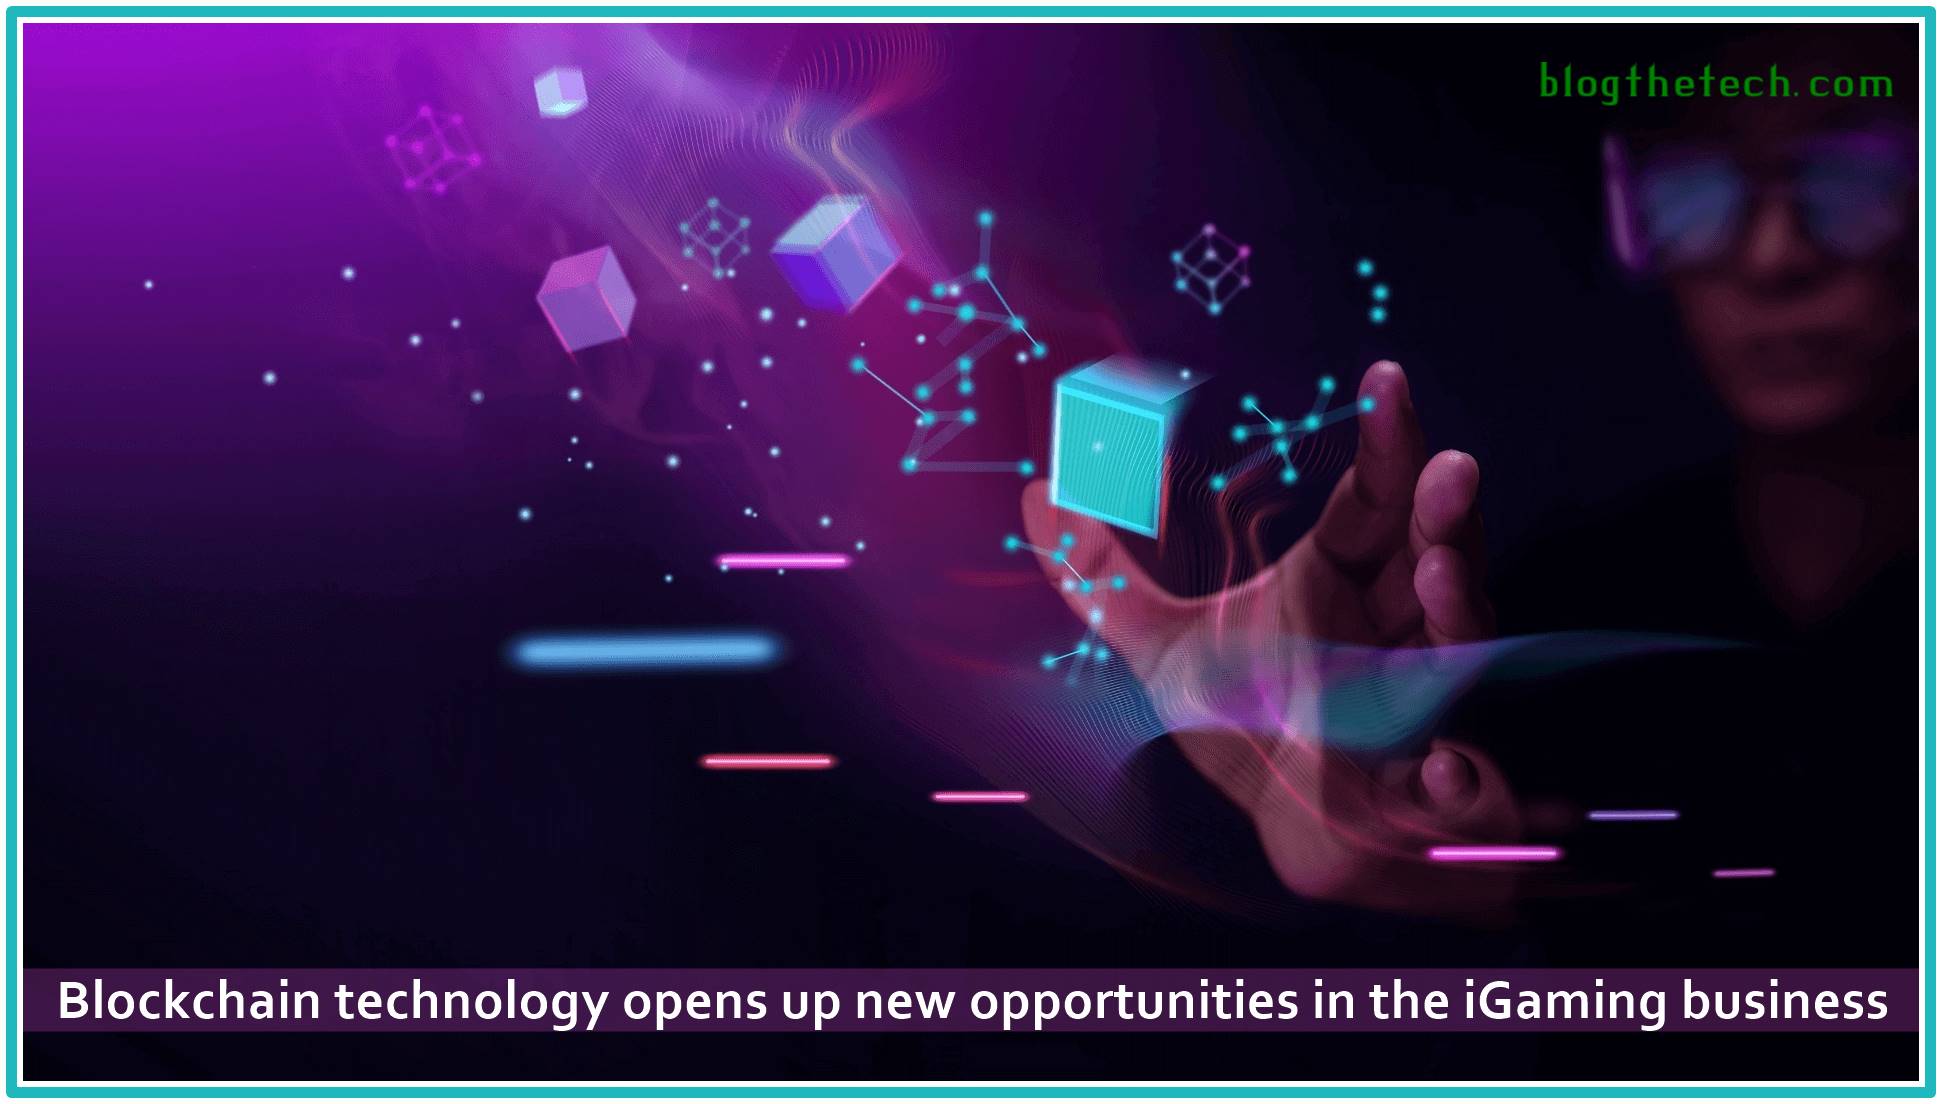 Blockchain technology opens up new opportunities in the iGaming business